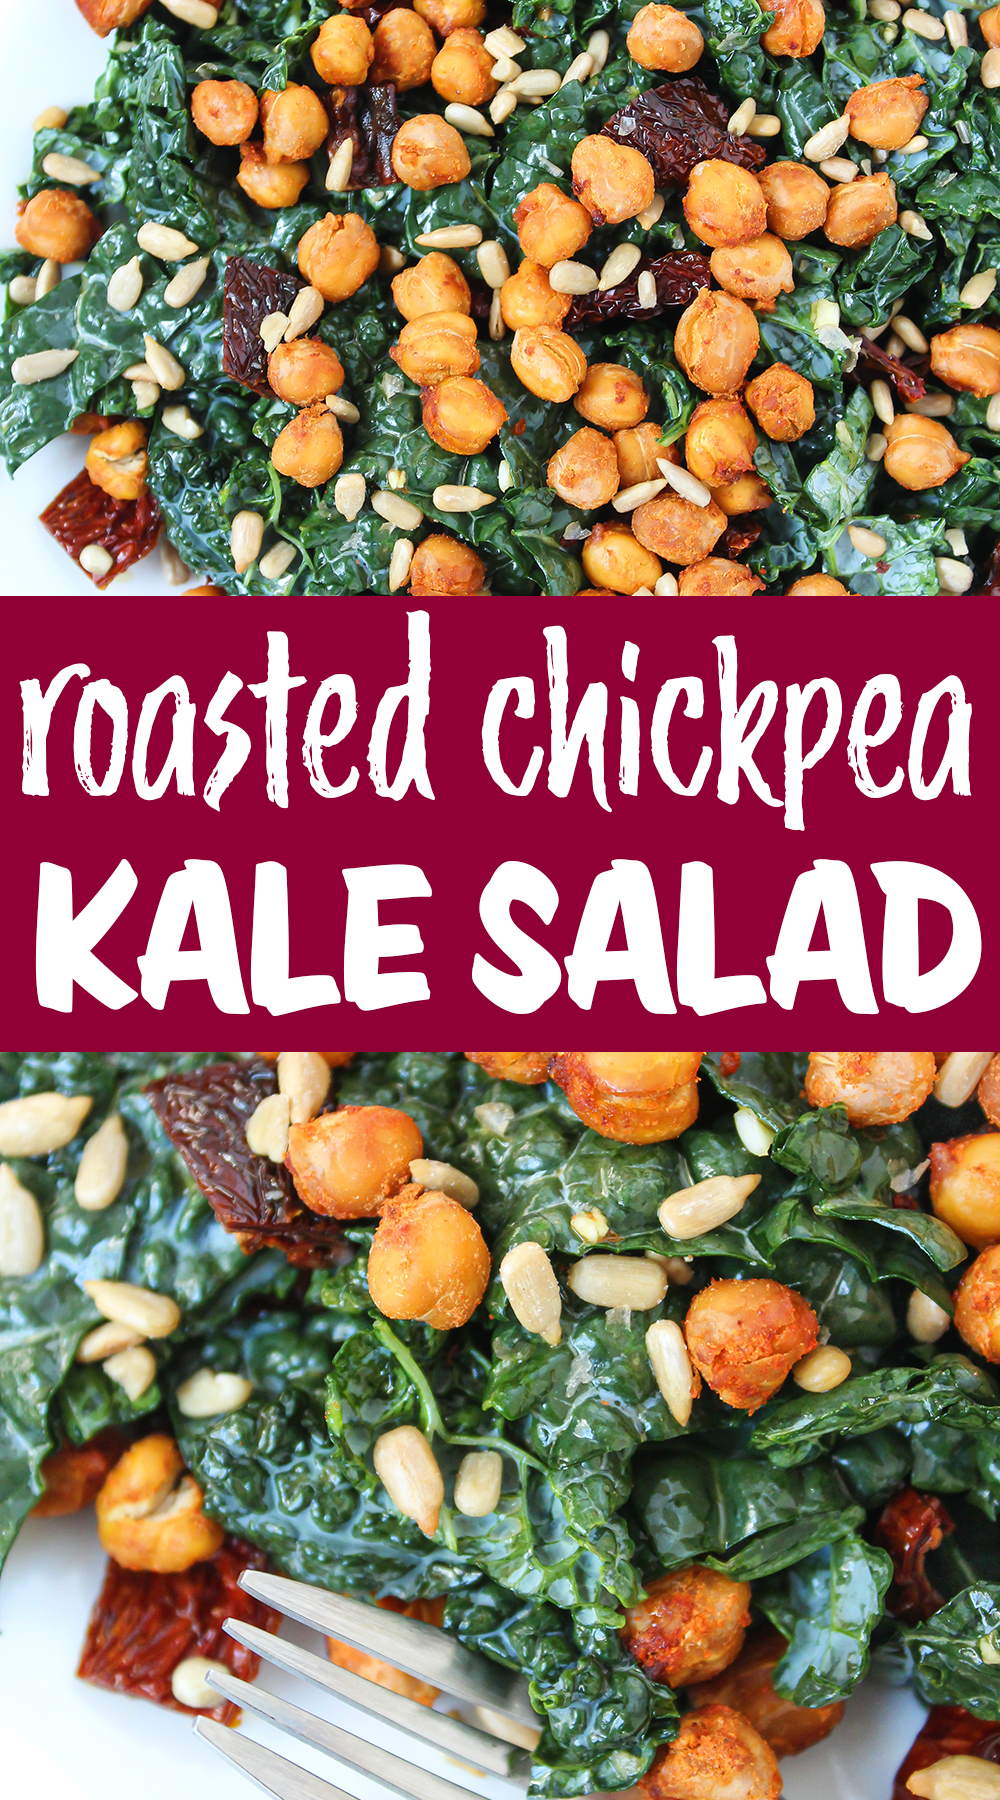 Roasted Chickpea Kale Salad with Sun-Dried Tomatoes (Vegan!) - The ...